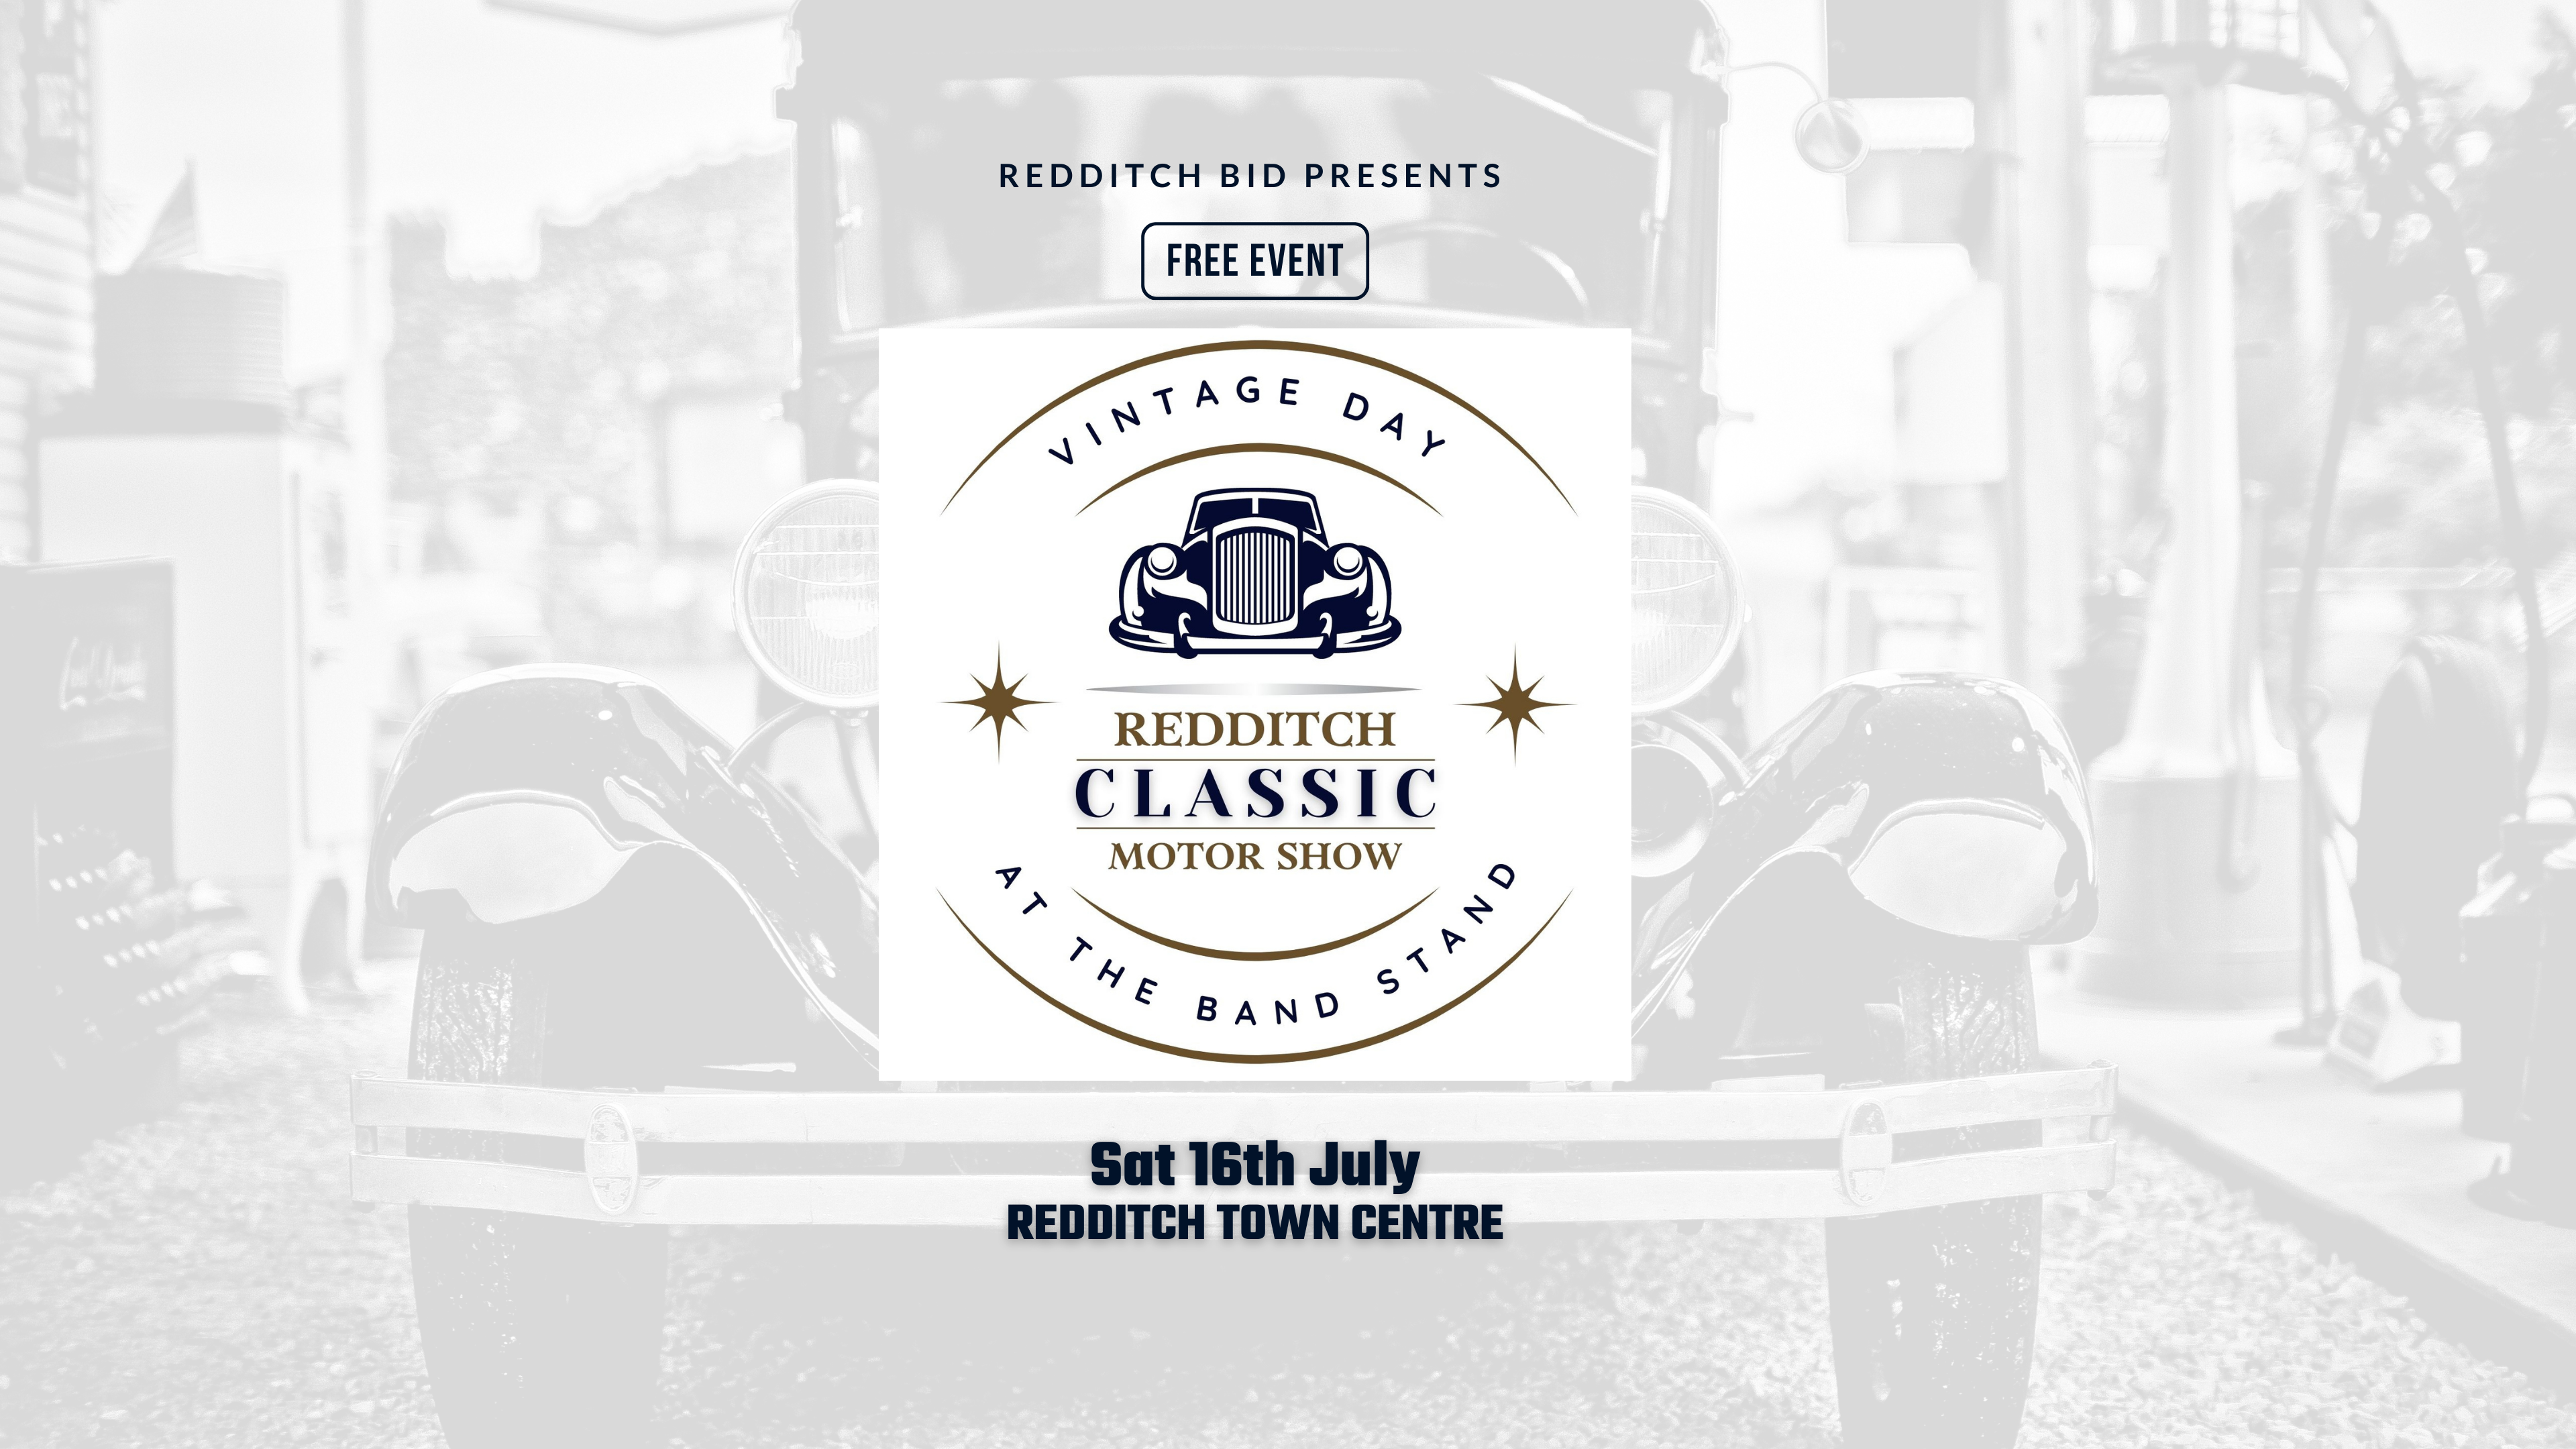 The Vintage Day at the Band Stand event is set to return bigger and better as “Redditch Classic Motor Show” this July.